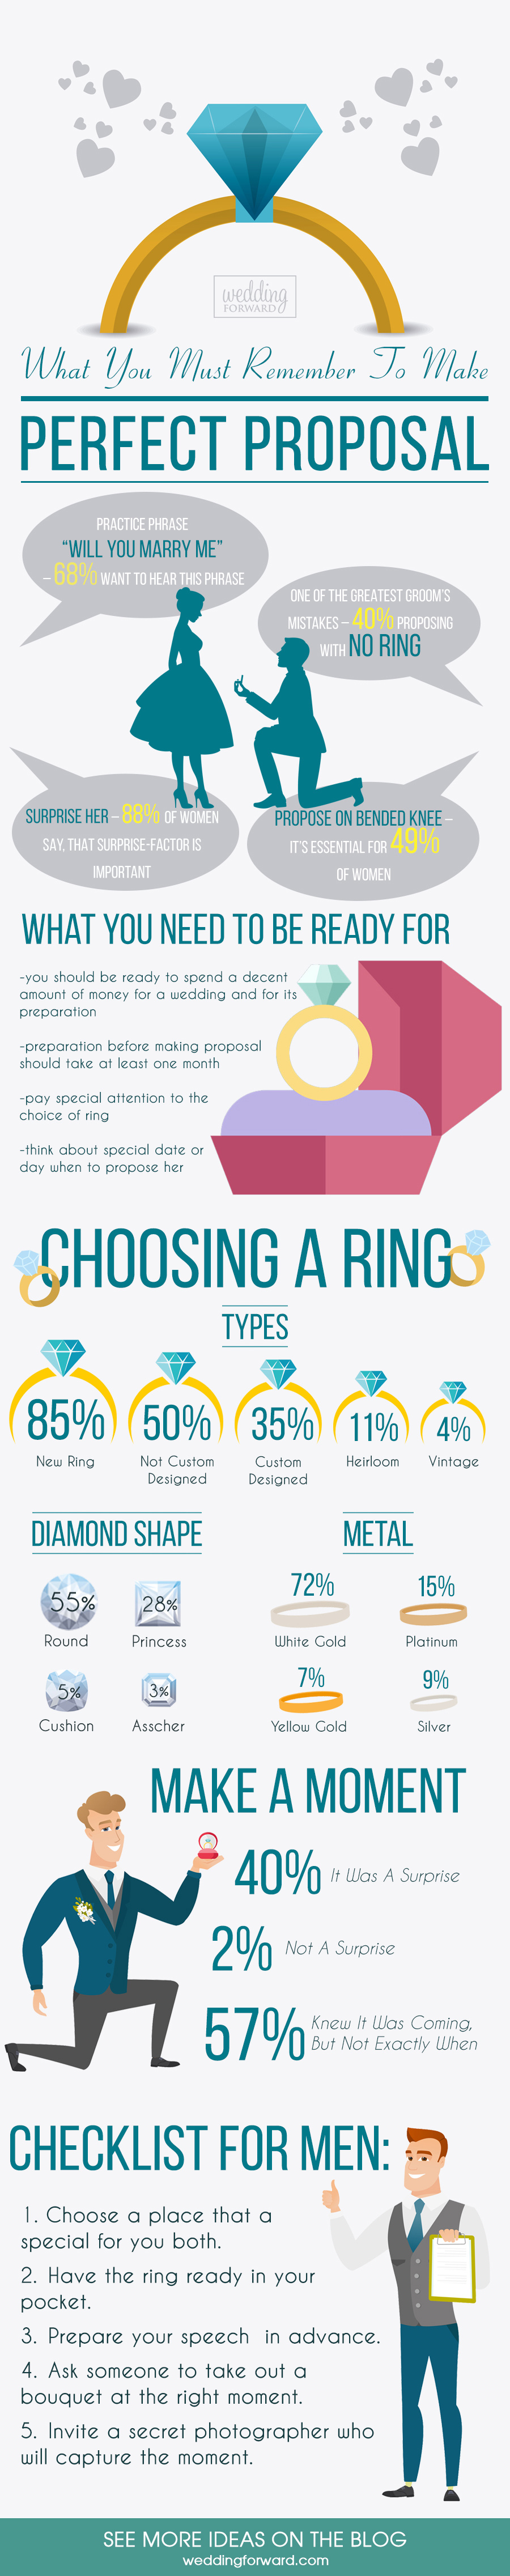 marriage proposal infographics what you must remember to make perfect proposal